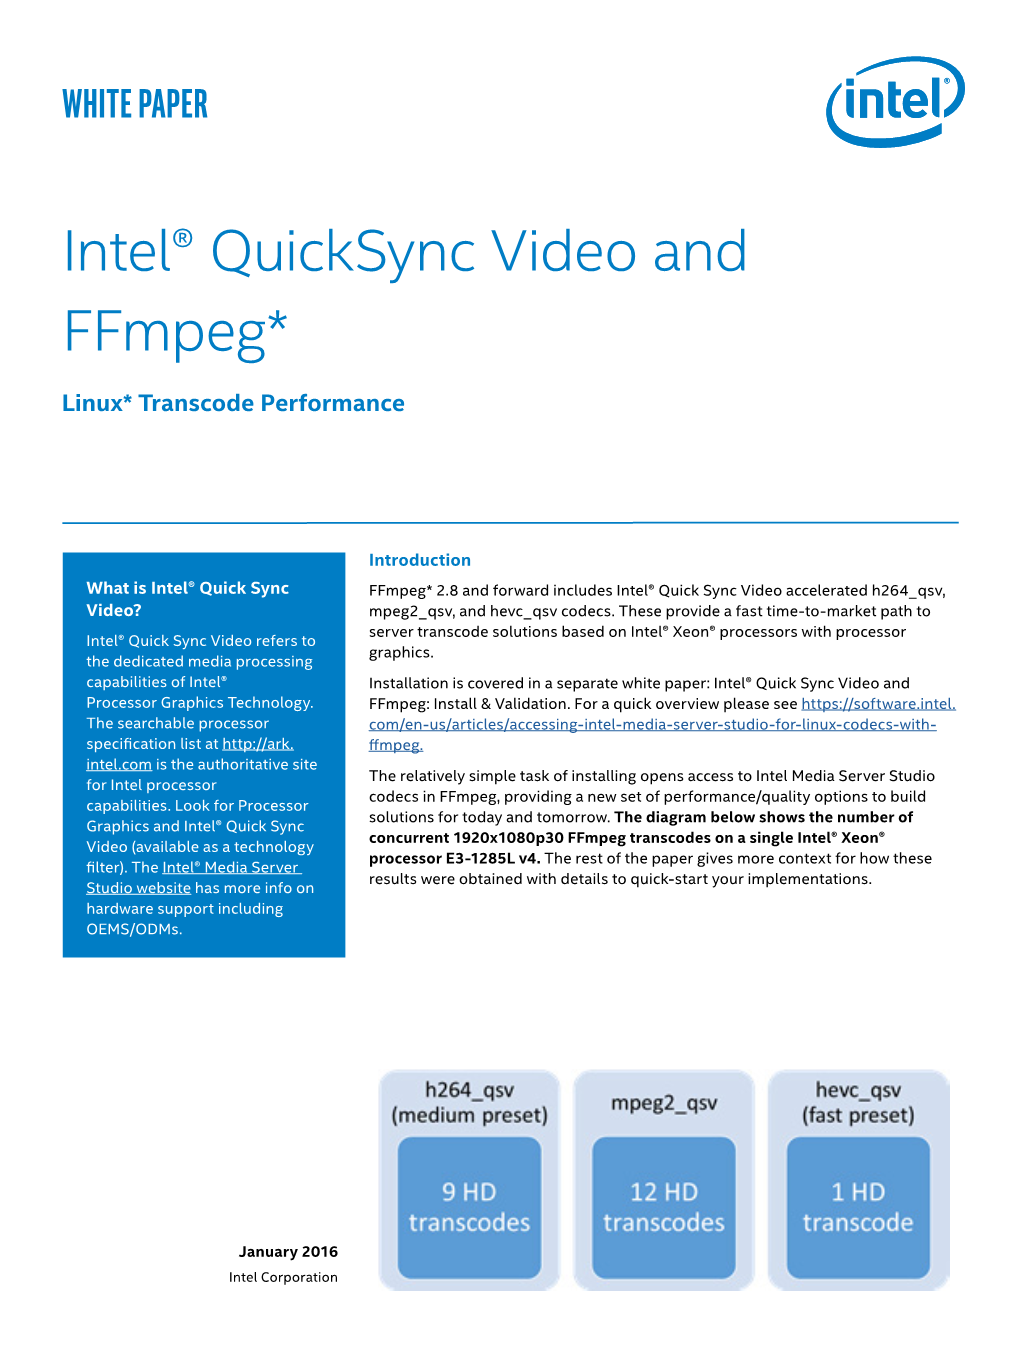 Intel® Quick Sync Video and Ffmpeg Performance